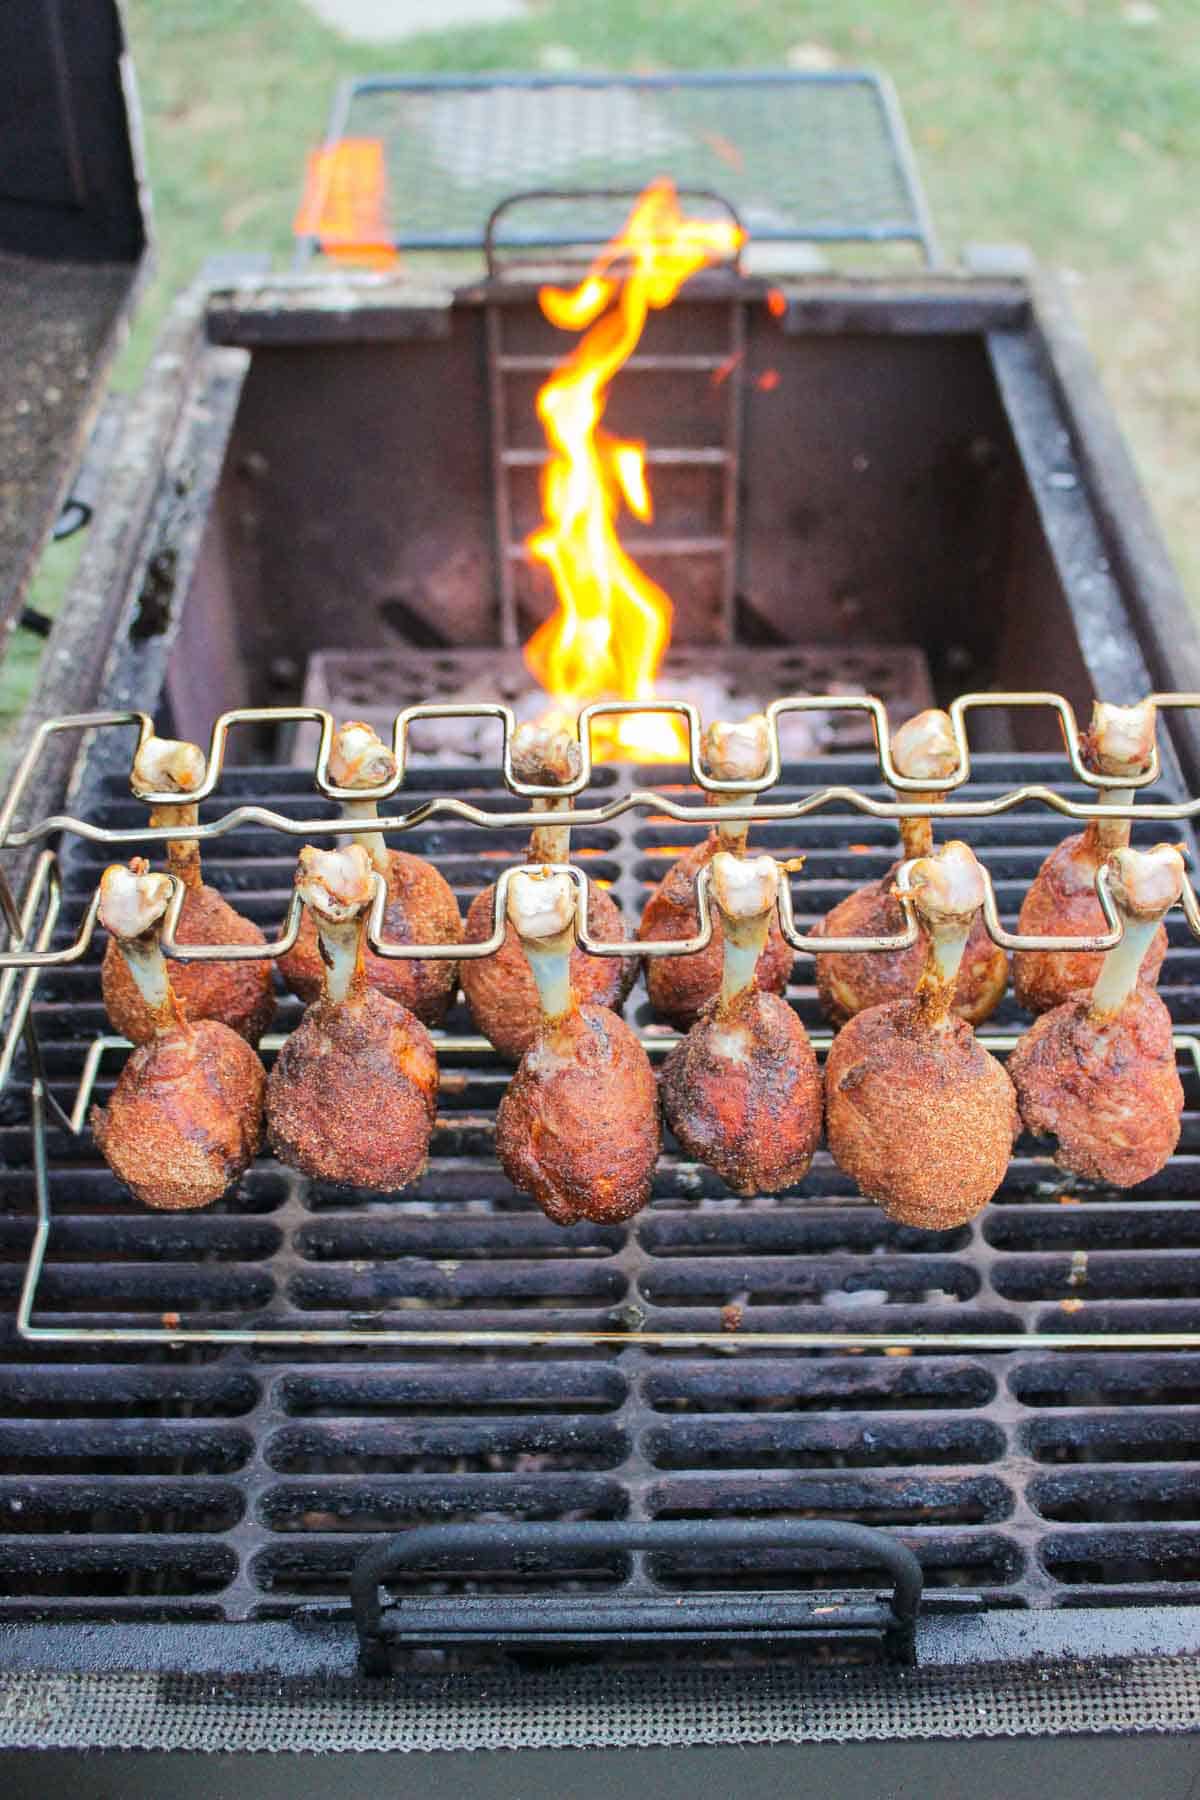 The smoked chicken lollipops after a couple hours of cooking.